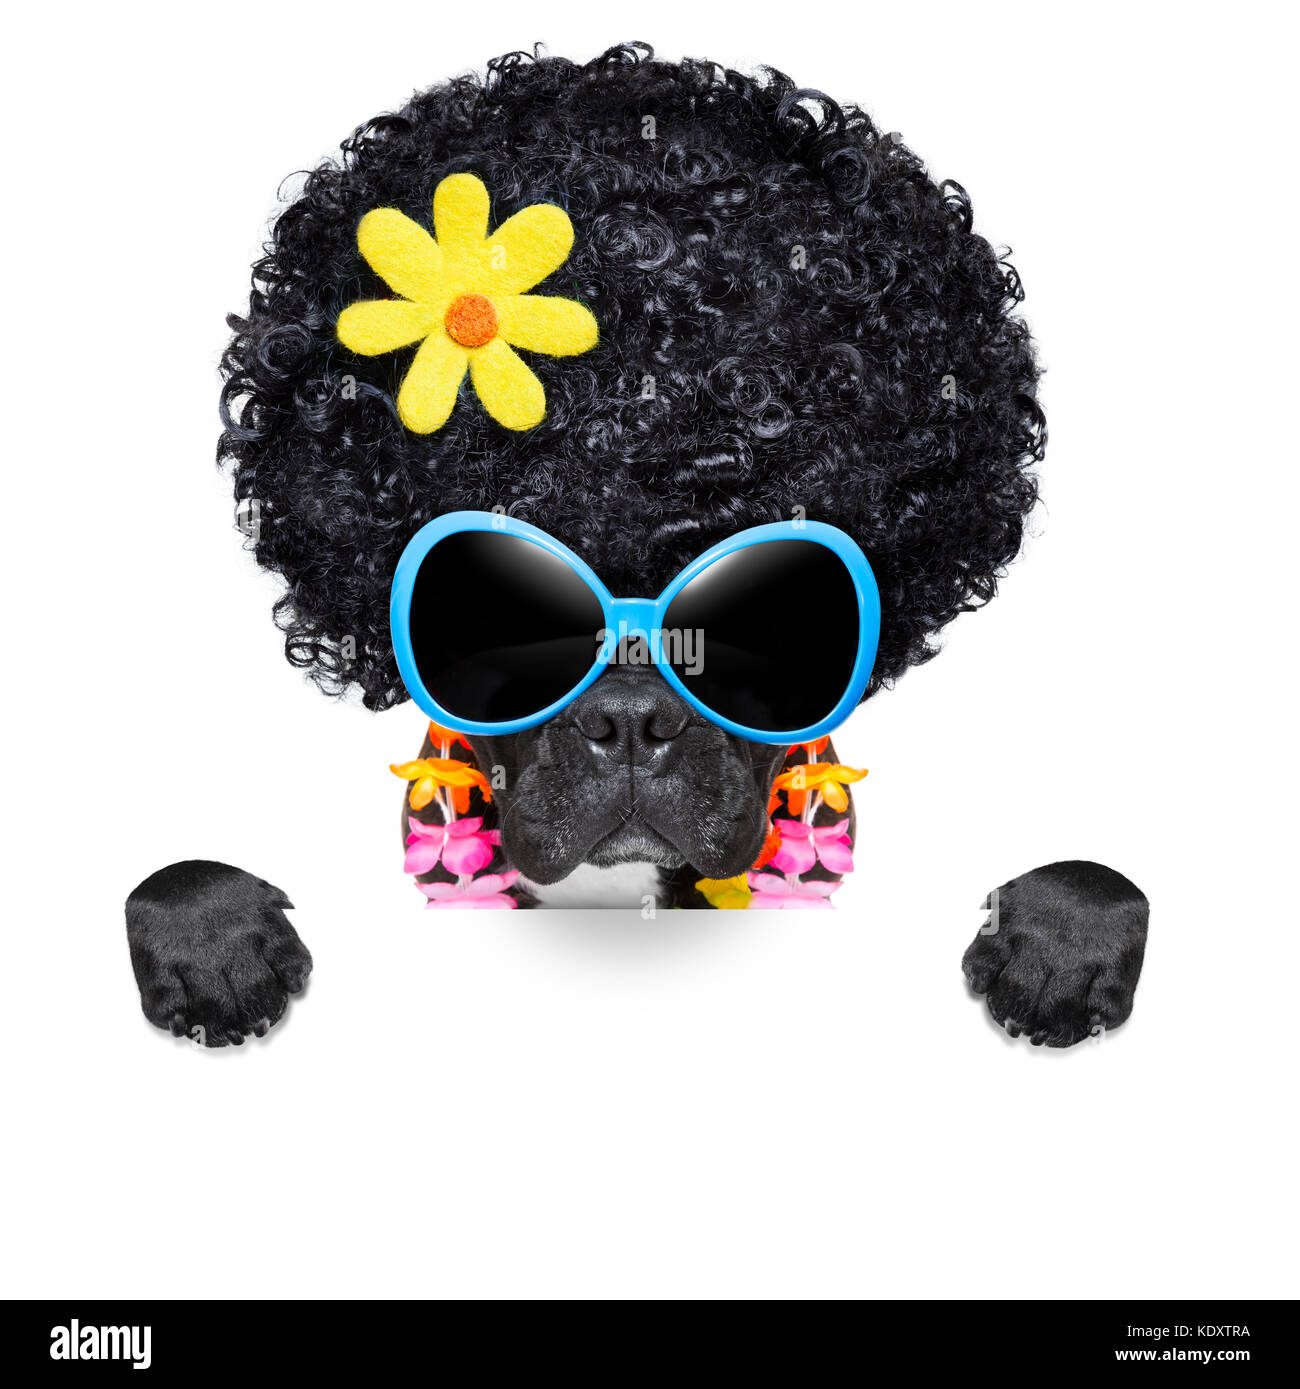 hippie dog of the seventies with big afro wig  a yellow flower behind blank banner Stock Photo